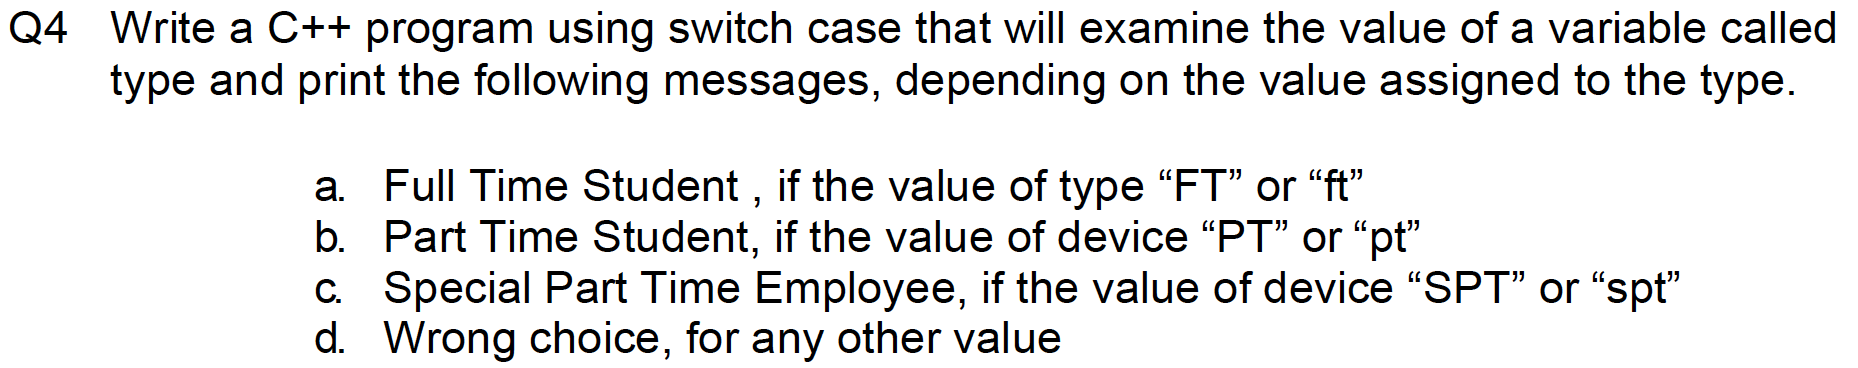 Write a C++ program using switch case that will examine the value of a variable called
type and print the following messages, depending on the value assigned to the type.
a. Full Time Student , if the value of type “FT" or "ft"
b. Part Time Student, if the value of device “PT" or "pt"
c. Special Part Time Employee, if the value of device "SPT" or "spt"
d. Wrong choice, for any other value
